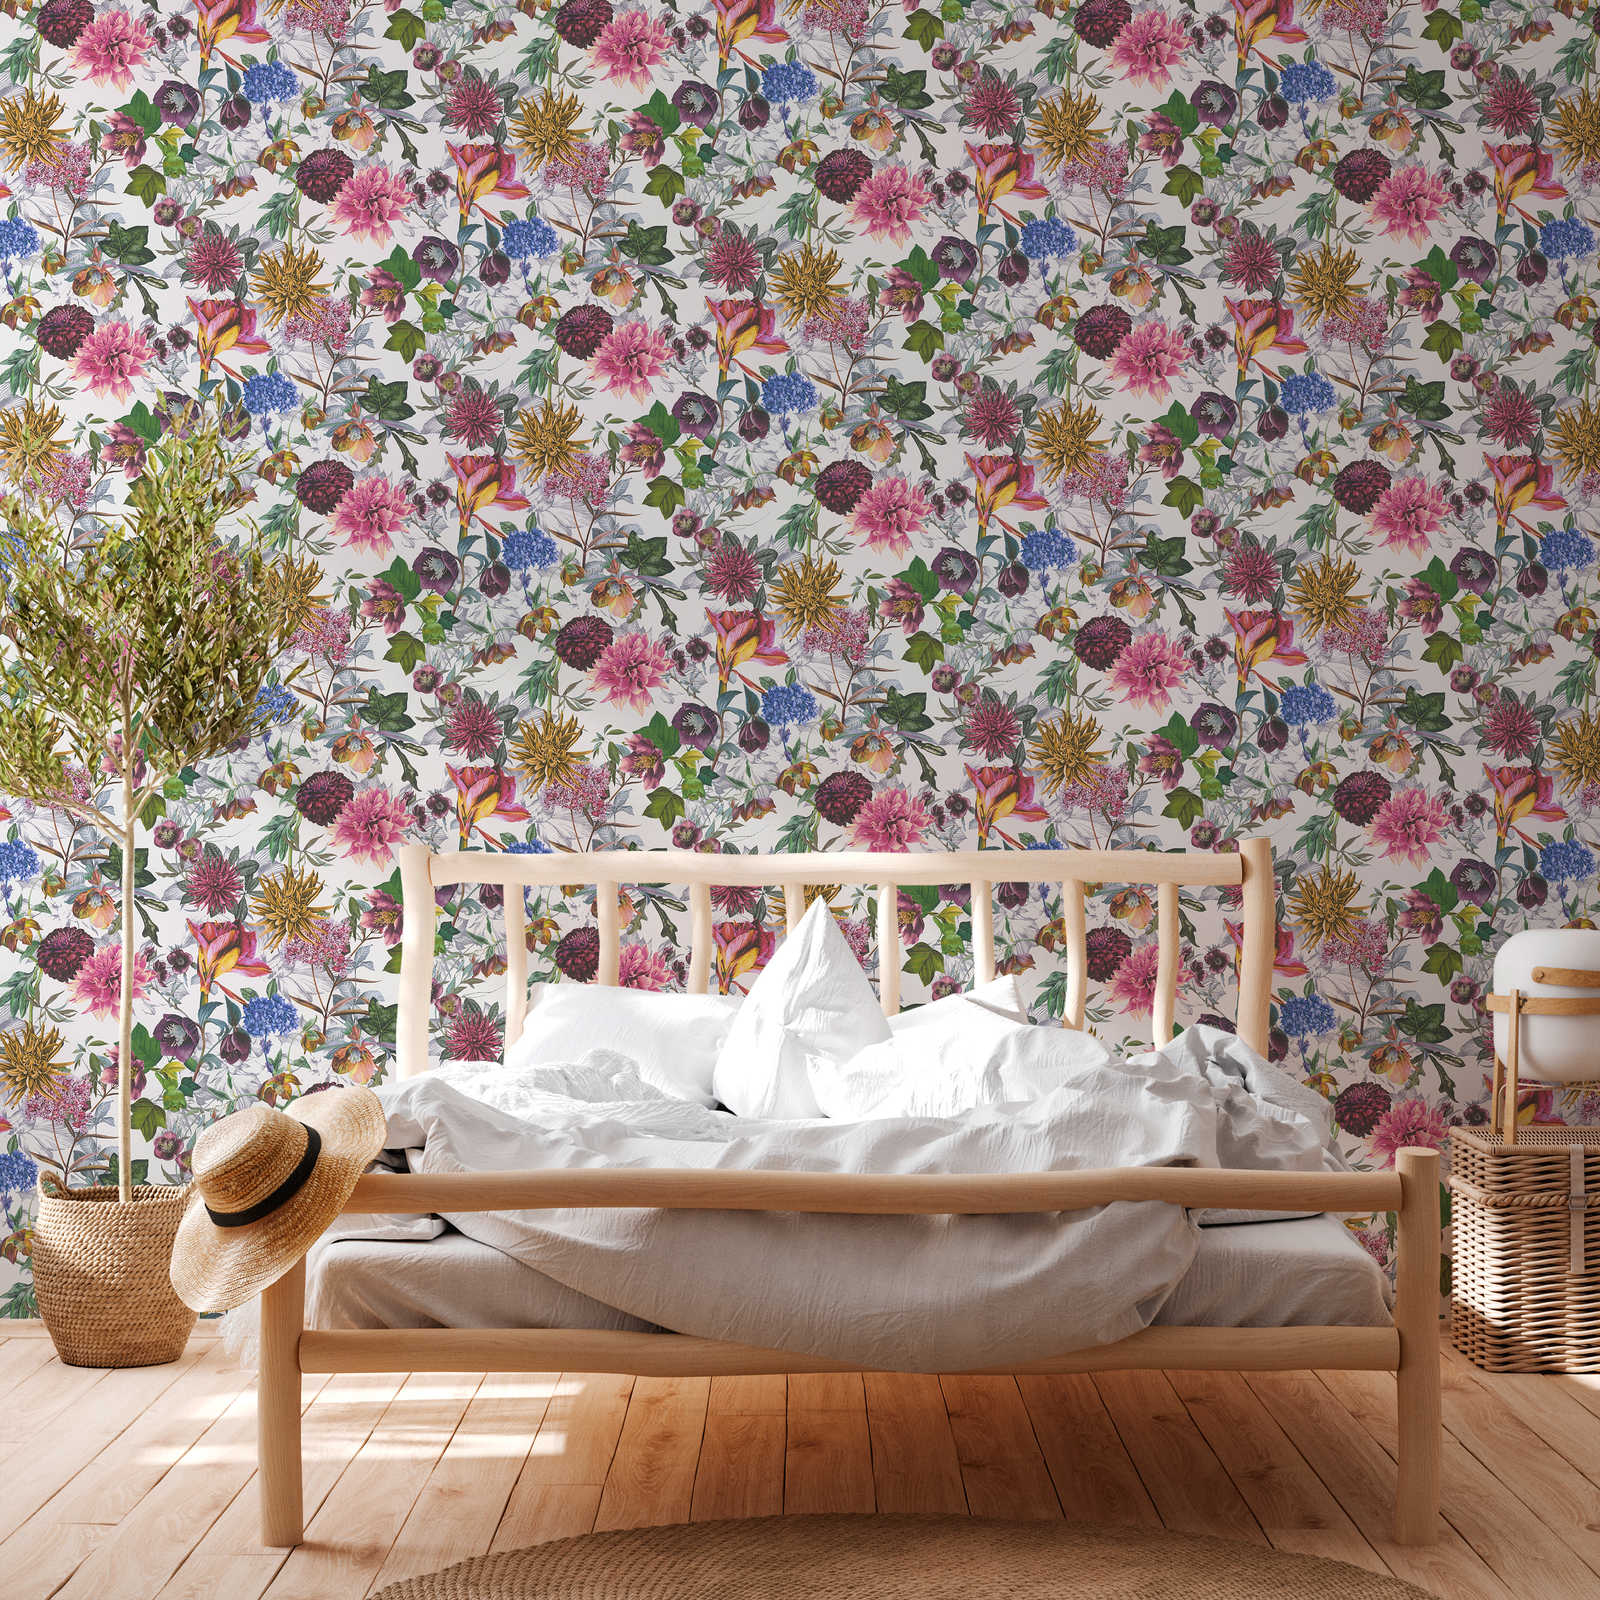             Floral wallpaper colourful with floral pattern - pink, green, yellow
        